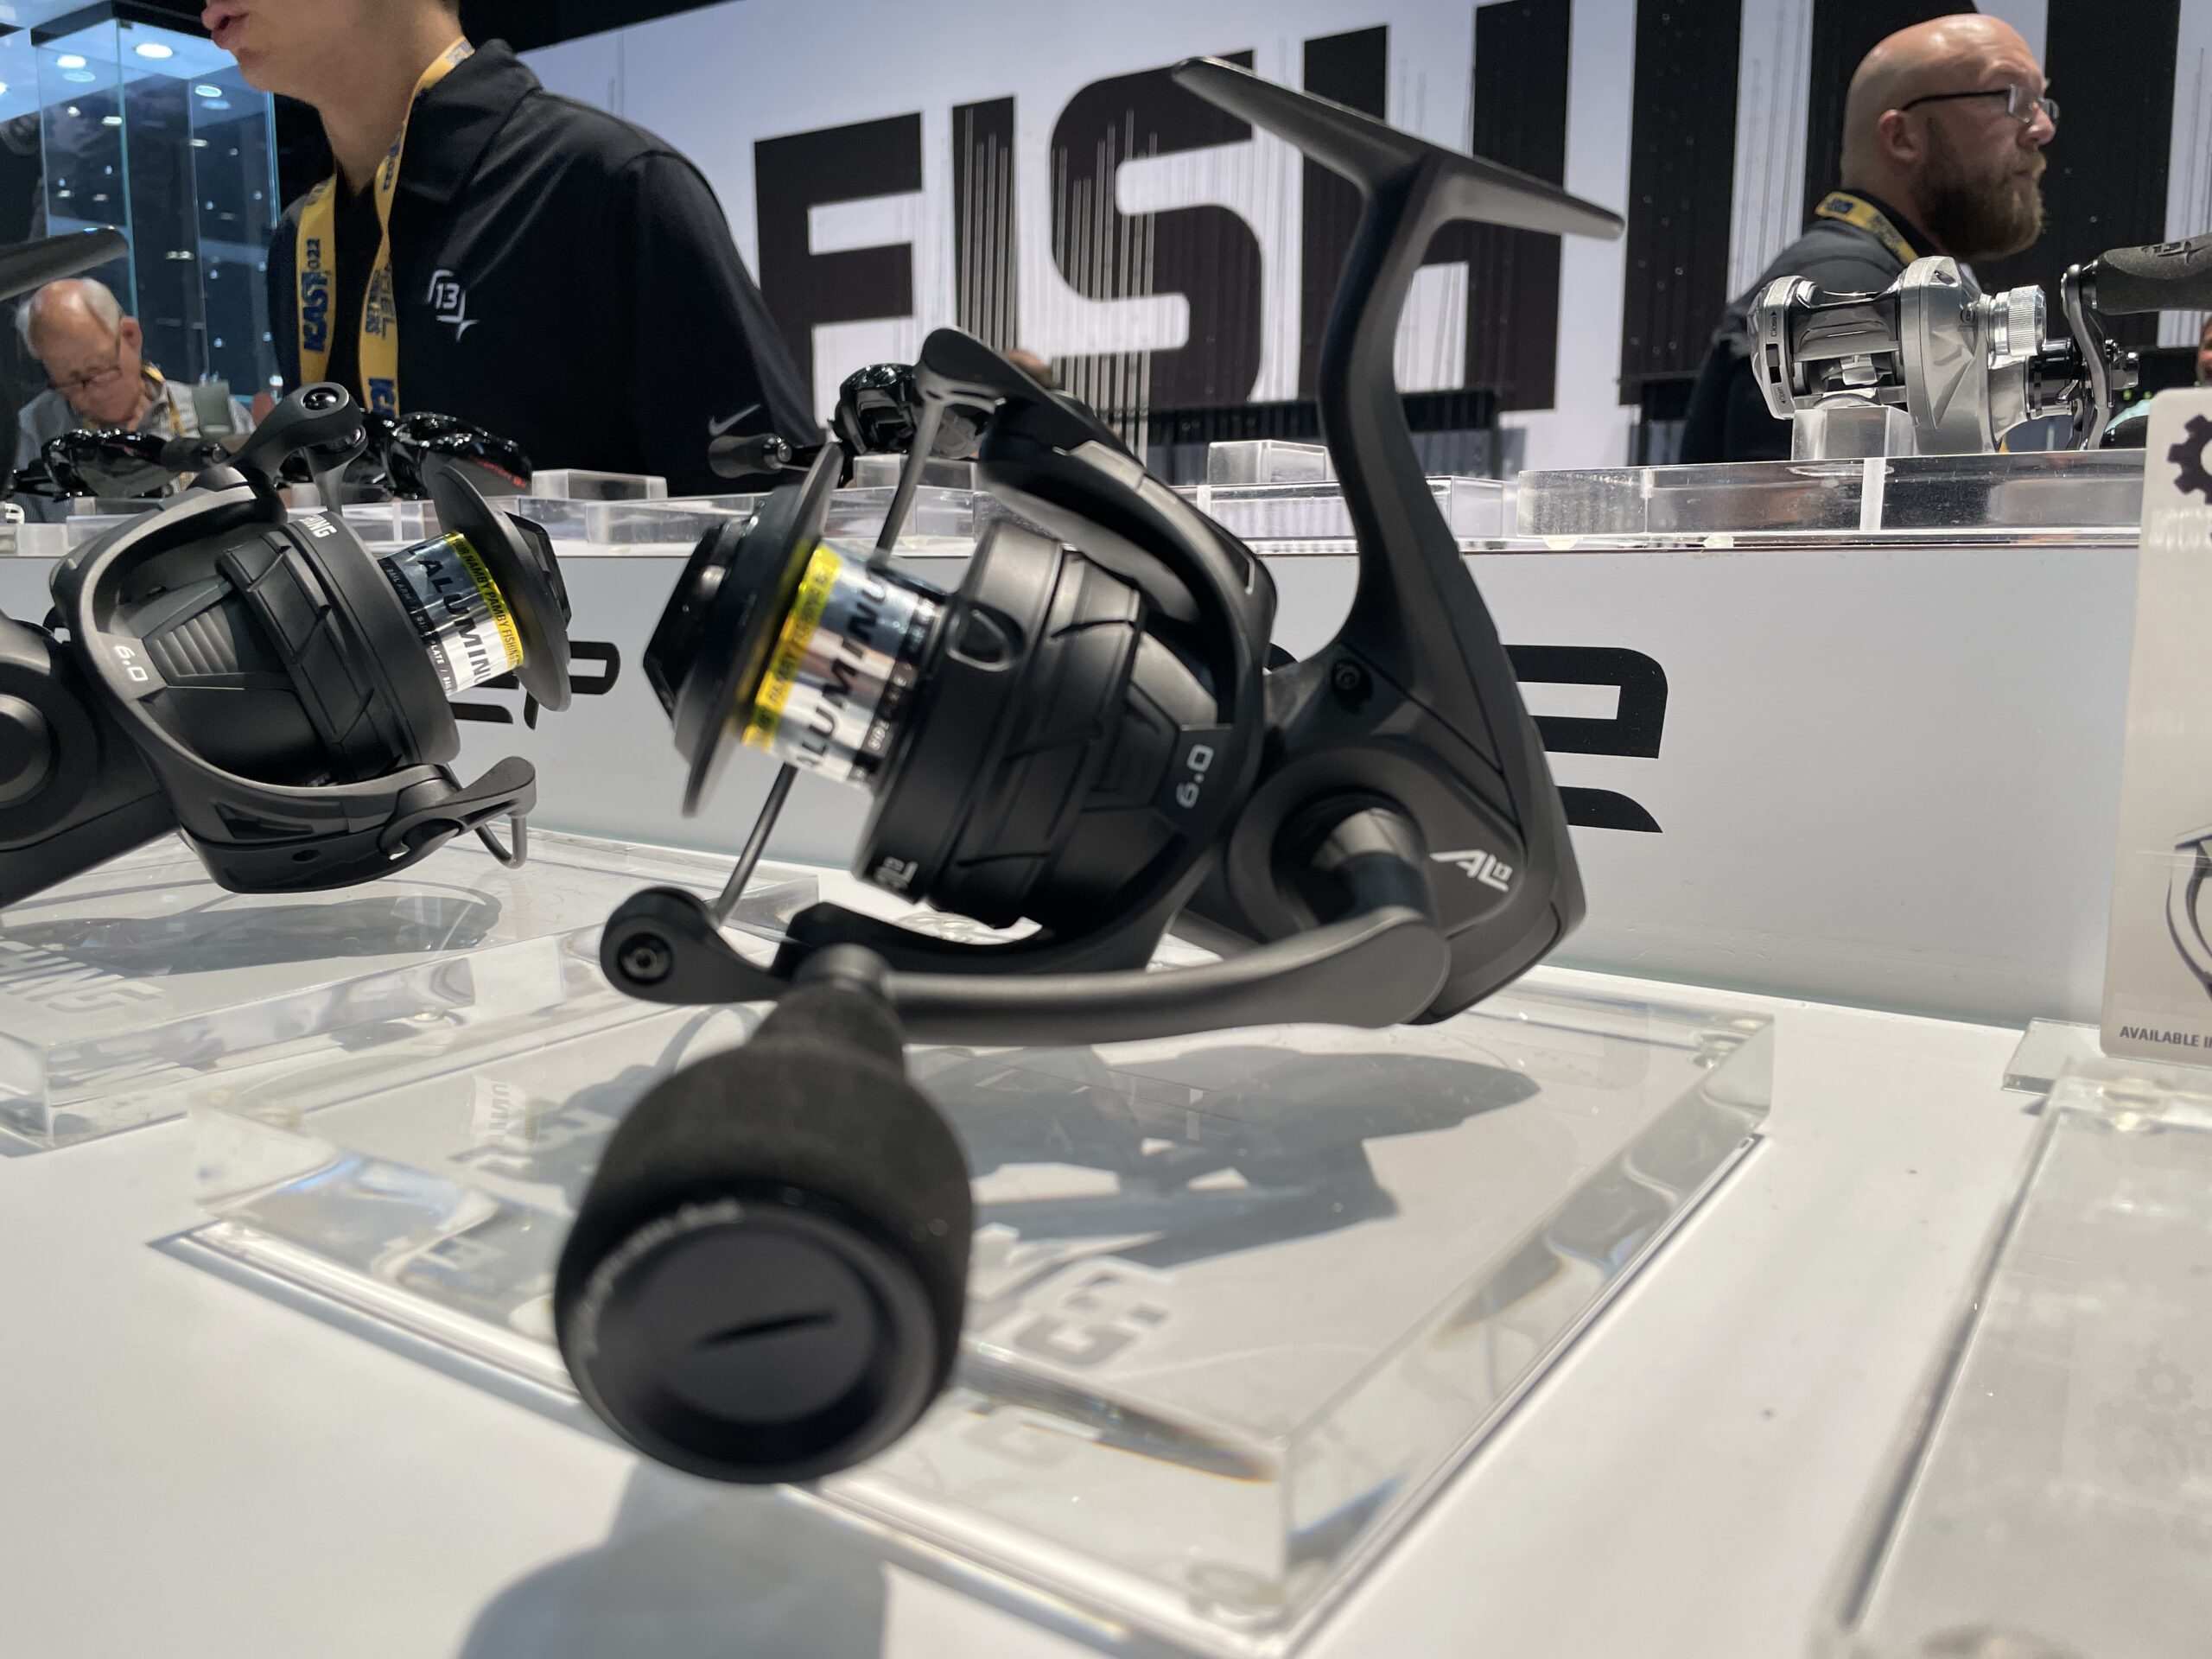 13 Reels has a new saltwater line, the AL, that is all aluminum and compares to some of the high end Shimano and Diawa reels, and is really cool looking with its all matte black finish.